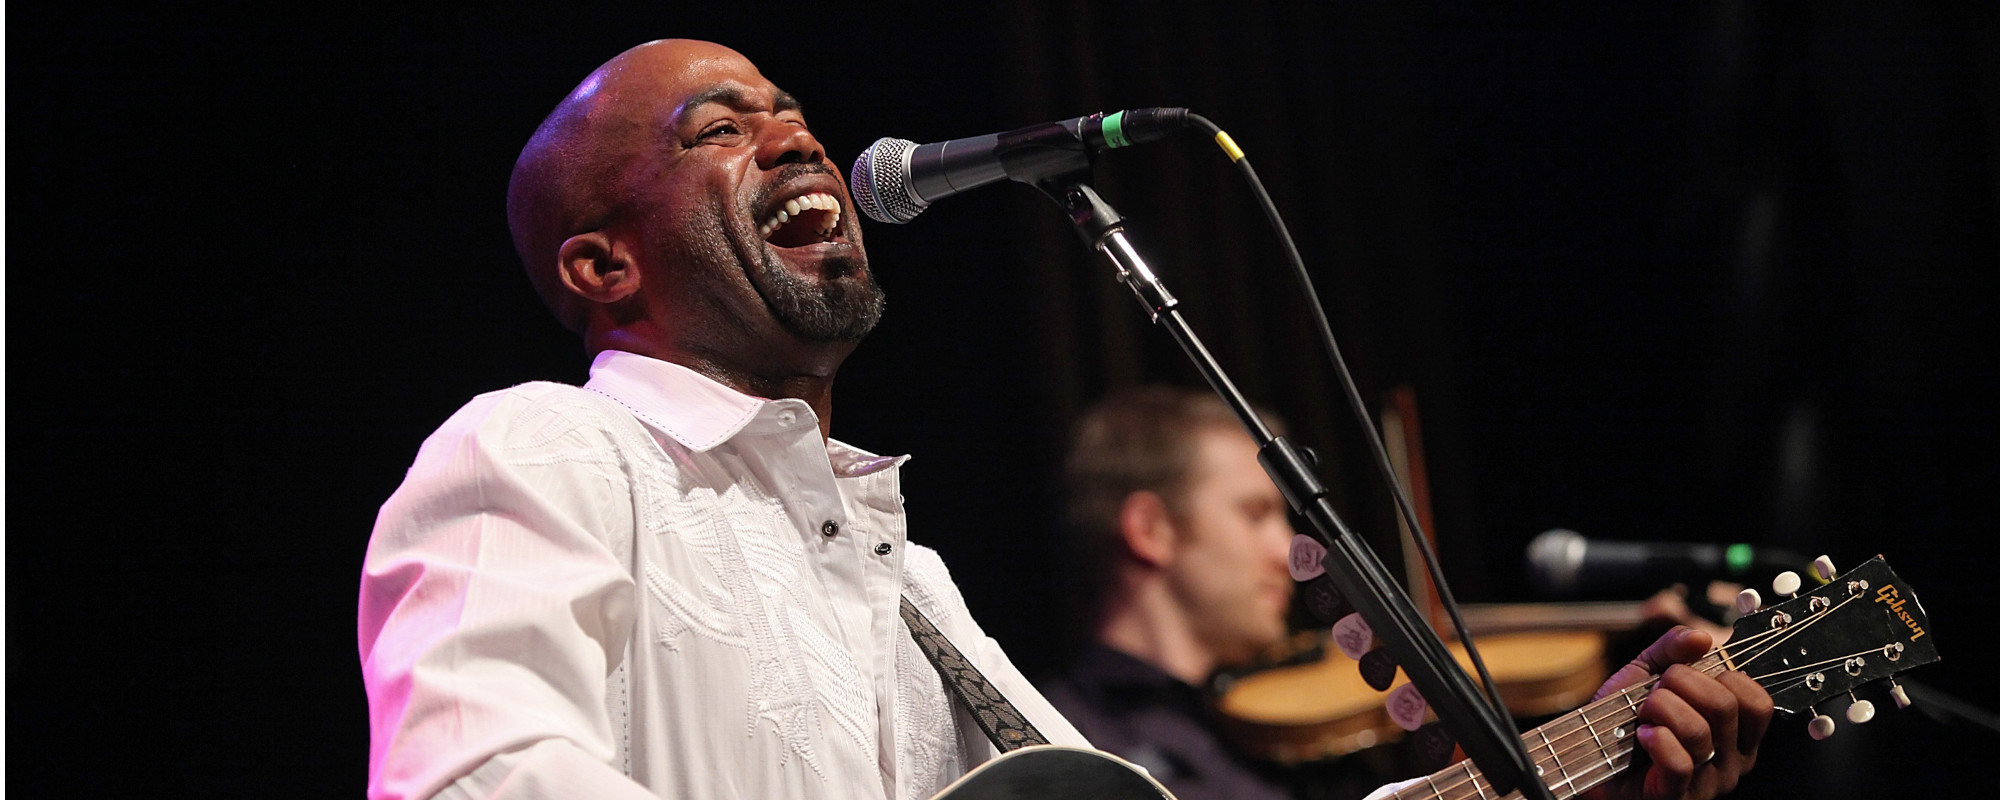 Hootie & the Blowfish Fans Take to Social Media to Defend Darius Rucker Following Drug Arrest